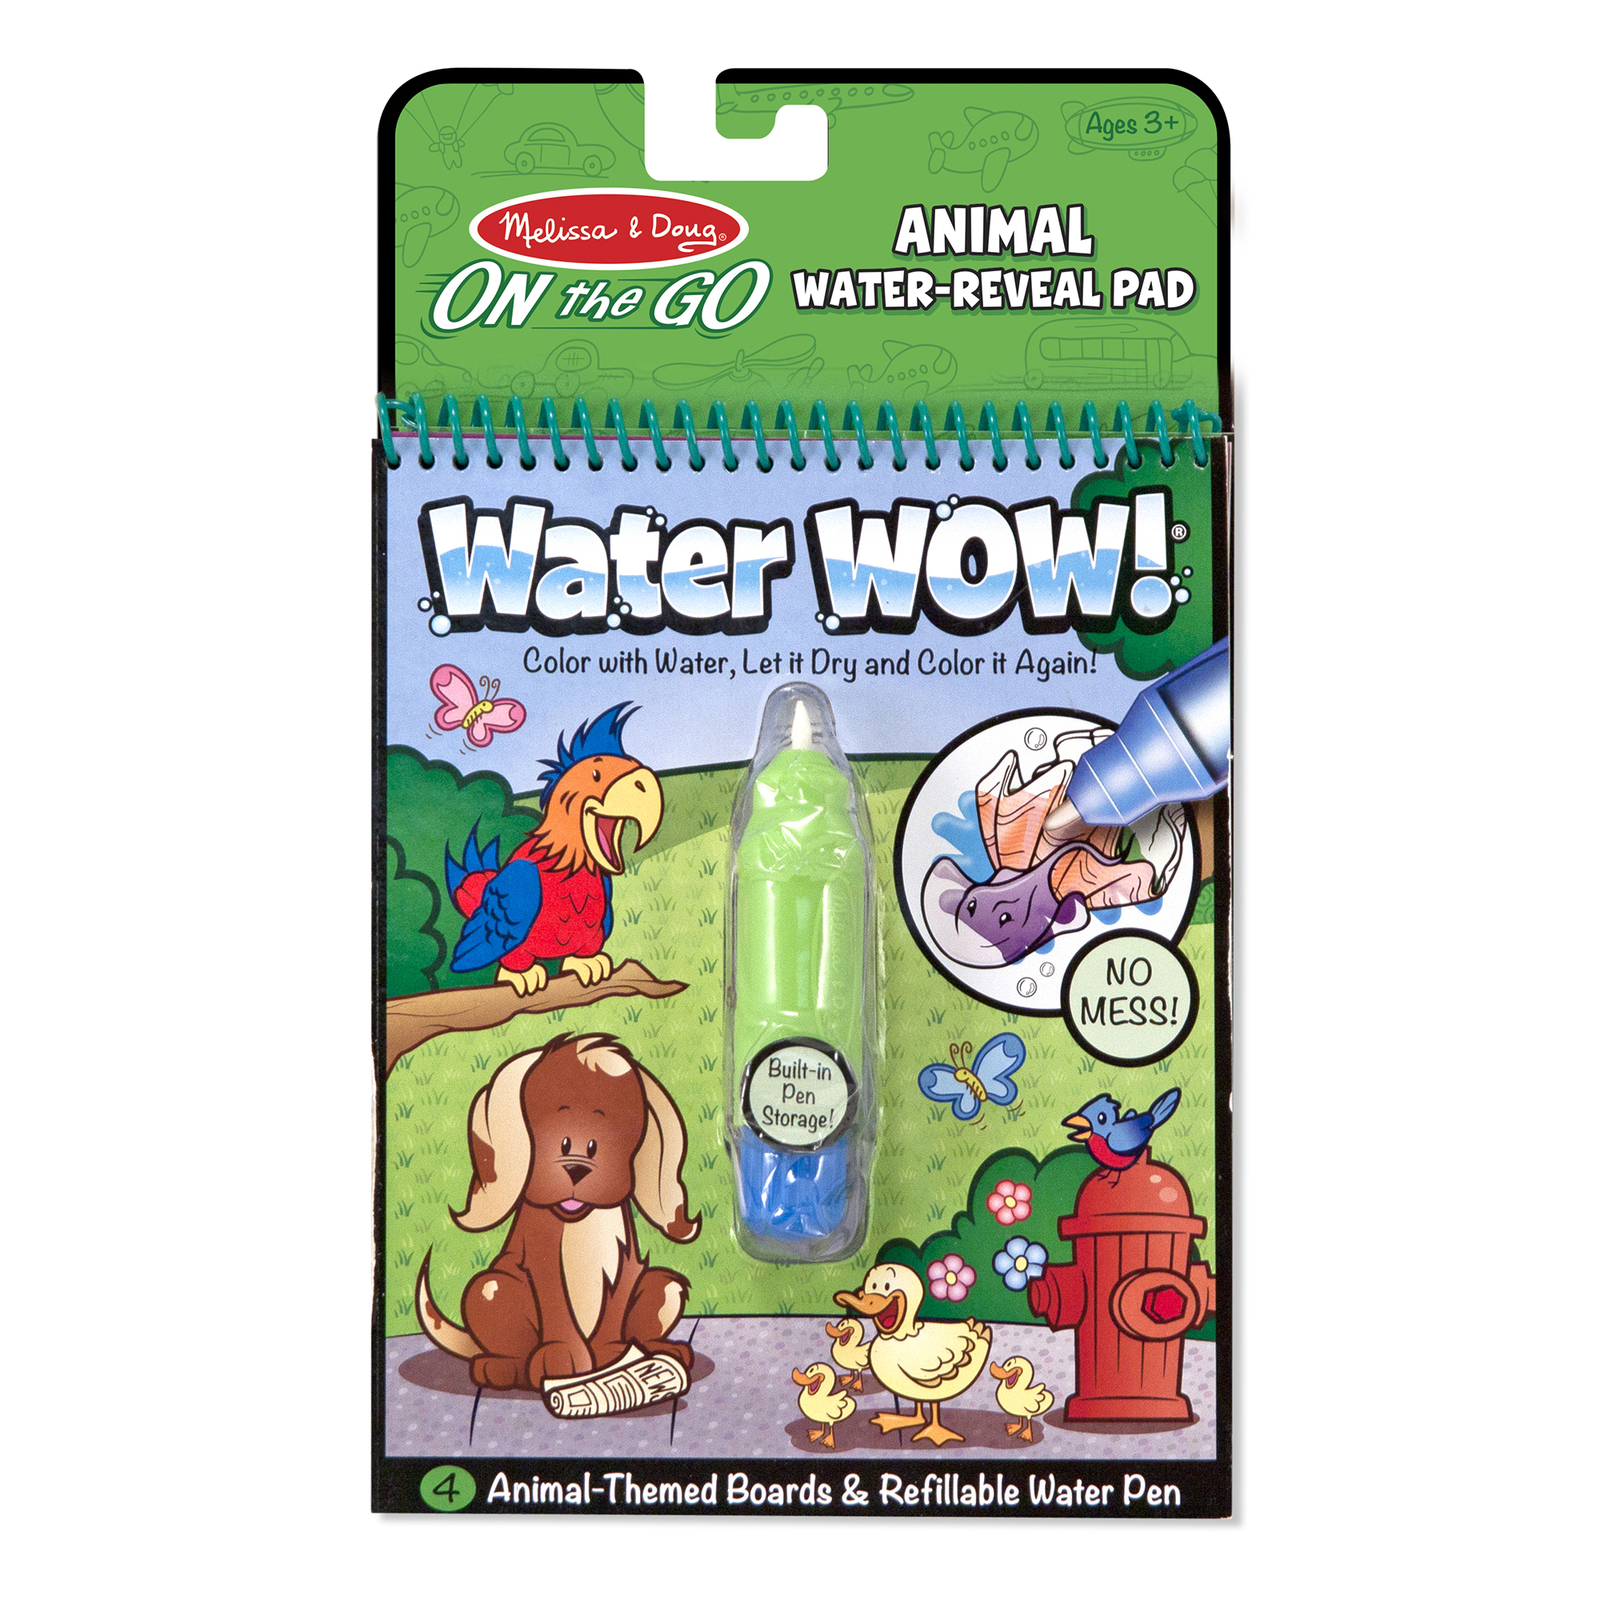 Melissa & Doug On the Go Water Wow! Animals Reusable Water-Reveal Activity Pad,  - $21.35